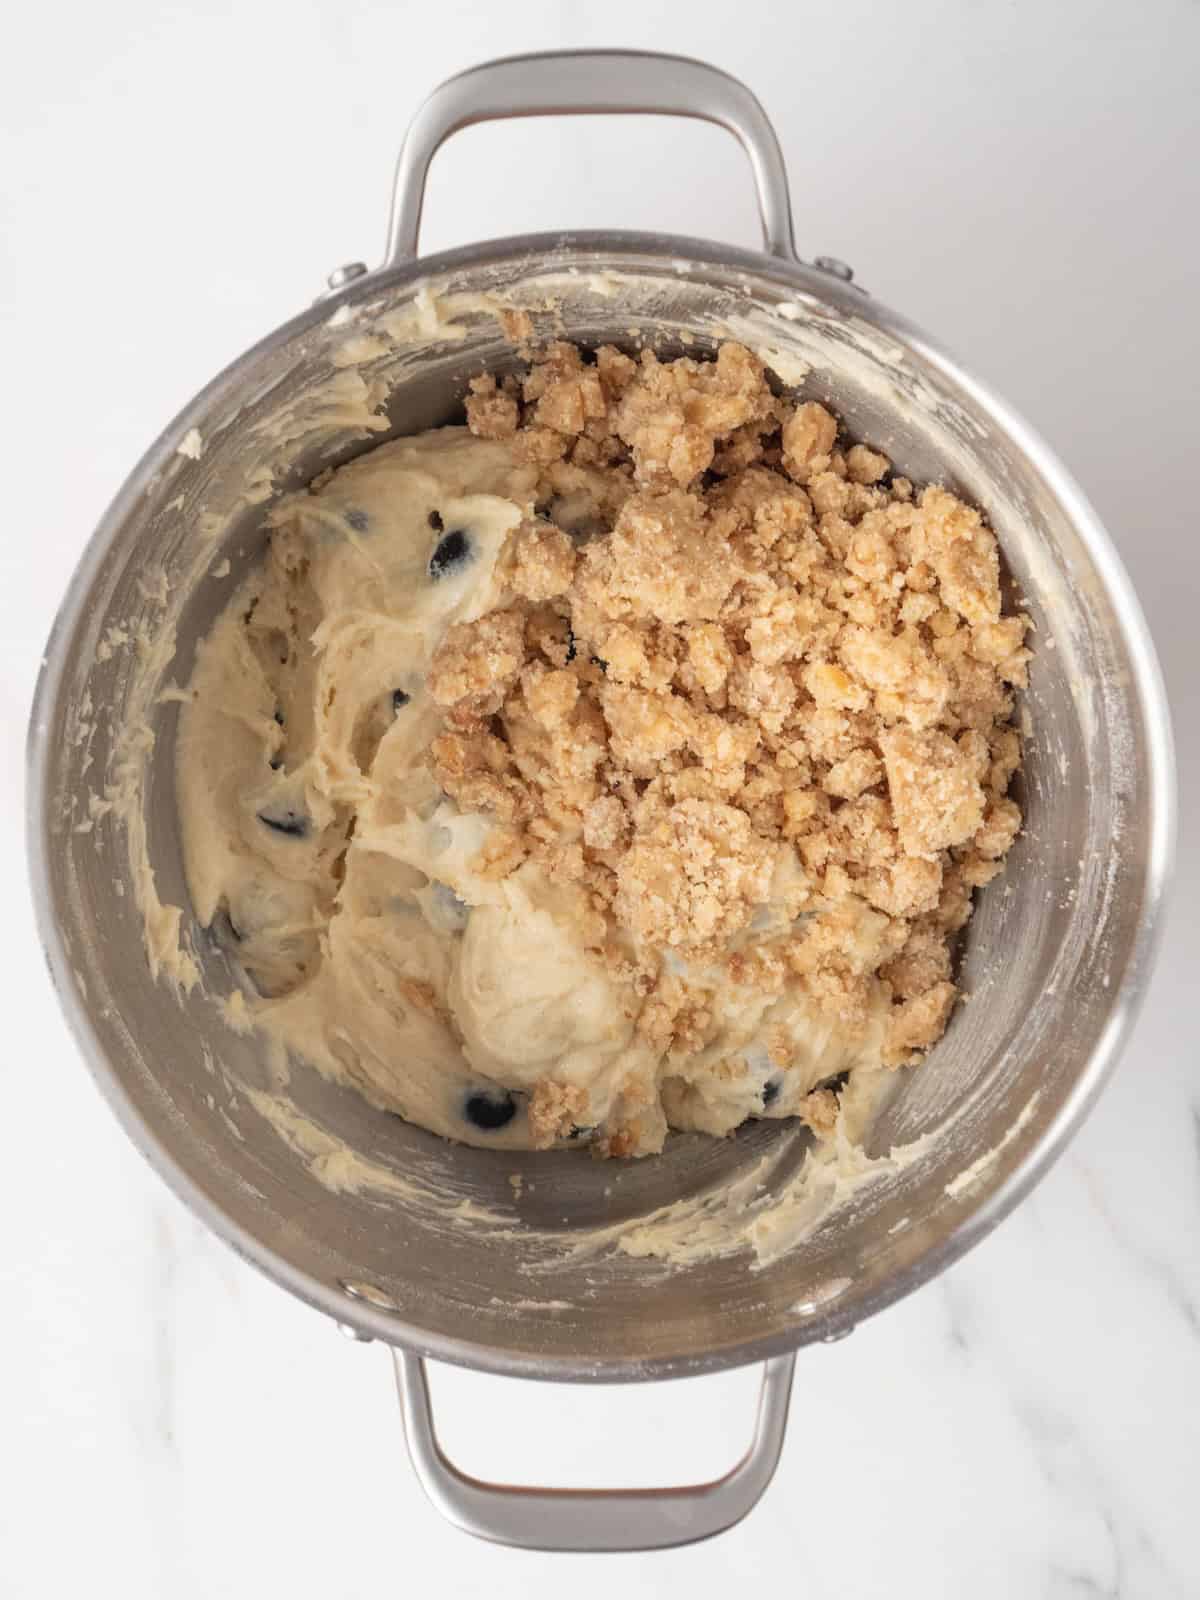 A stand mixer bowl with blueberry crumb muffin batter, with half of the walnut streusel mixture just added.